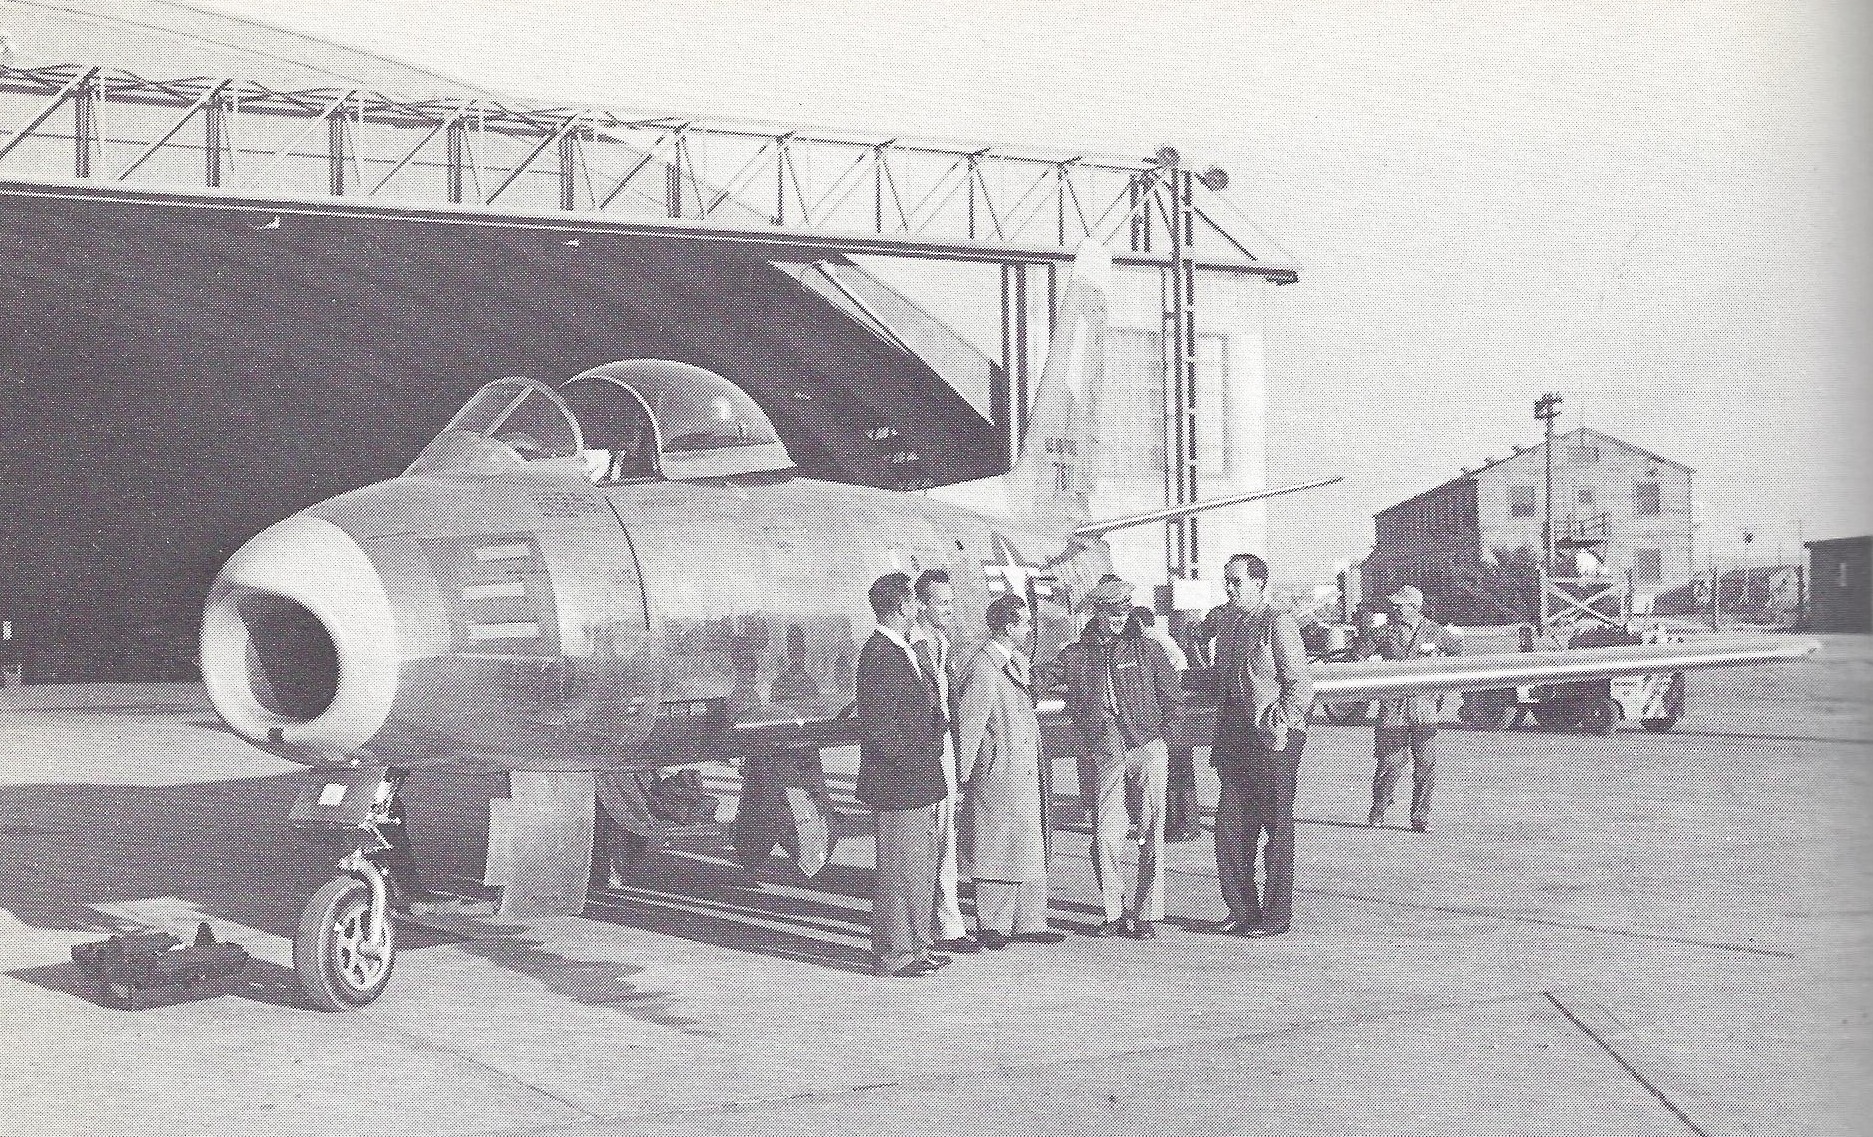 Major Richard L Johnson, USAF with F-86A-1-NA 47-611 and others at Muroc AFB, 15 September 1948. Note the gun port doors on this early production aircraft. They opened in 1/20 second as the trigger was pressed. Proper adjustment was complex and they were soon eliminated. (Image from F-86 SABRE, by Maurice Allward, Charles Scribner’s Sons, New York, 1978, Chapter 3 at Page 24.)